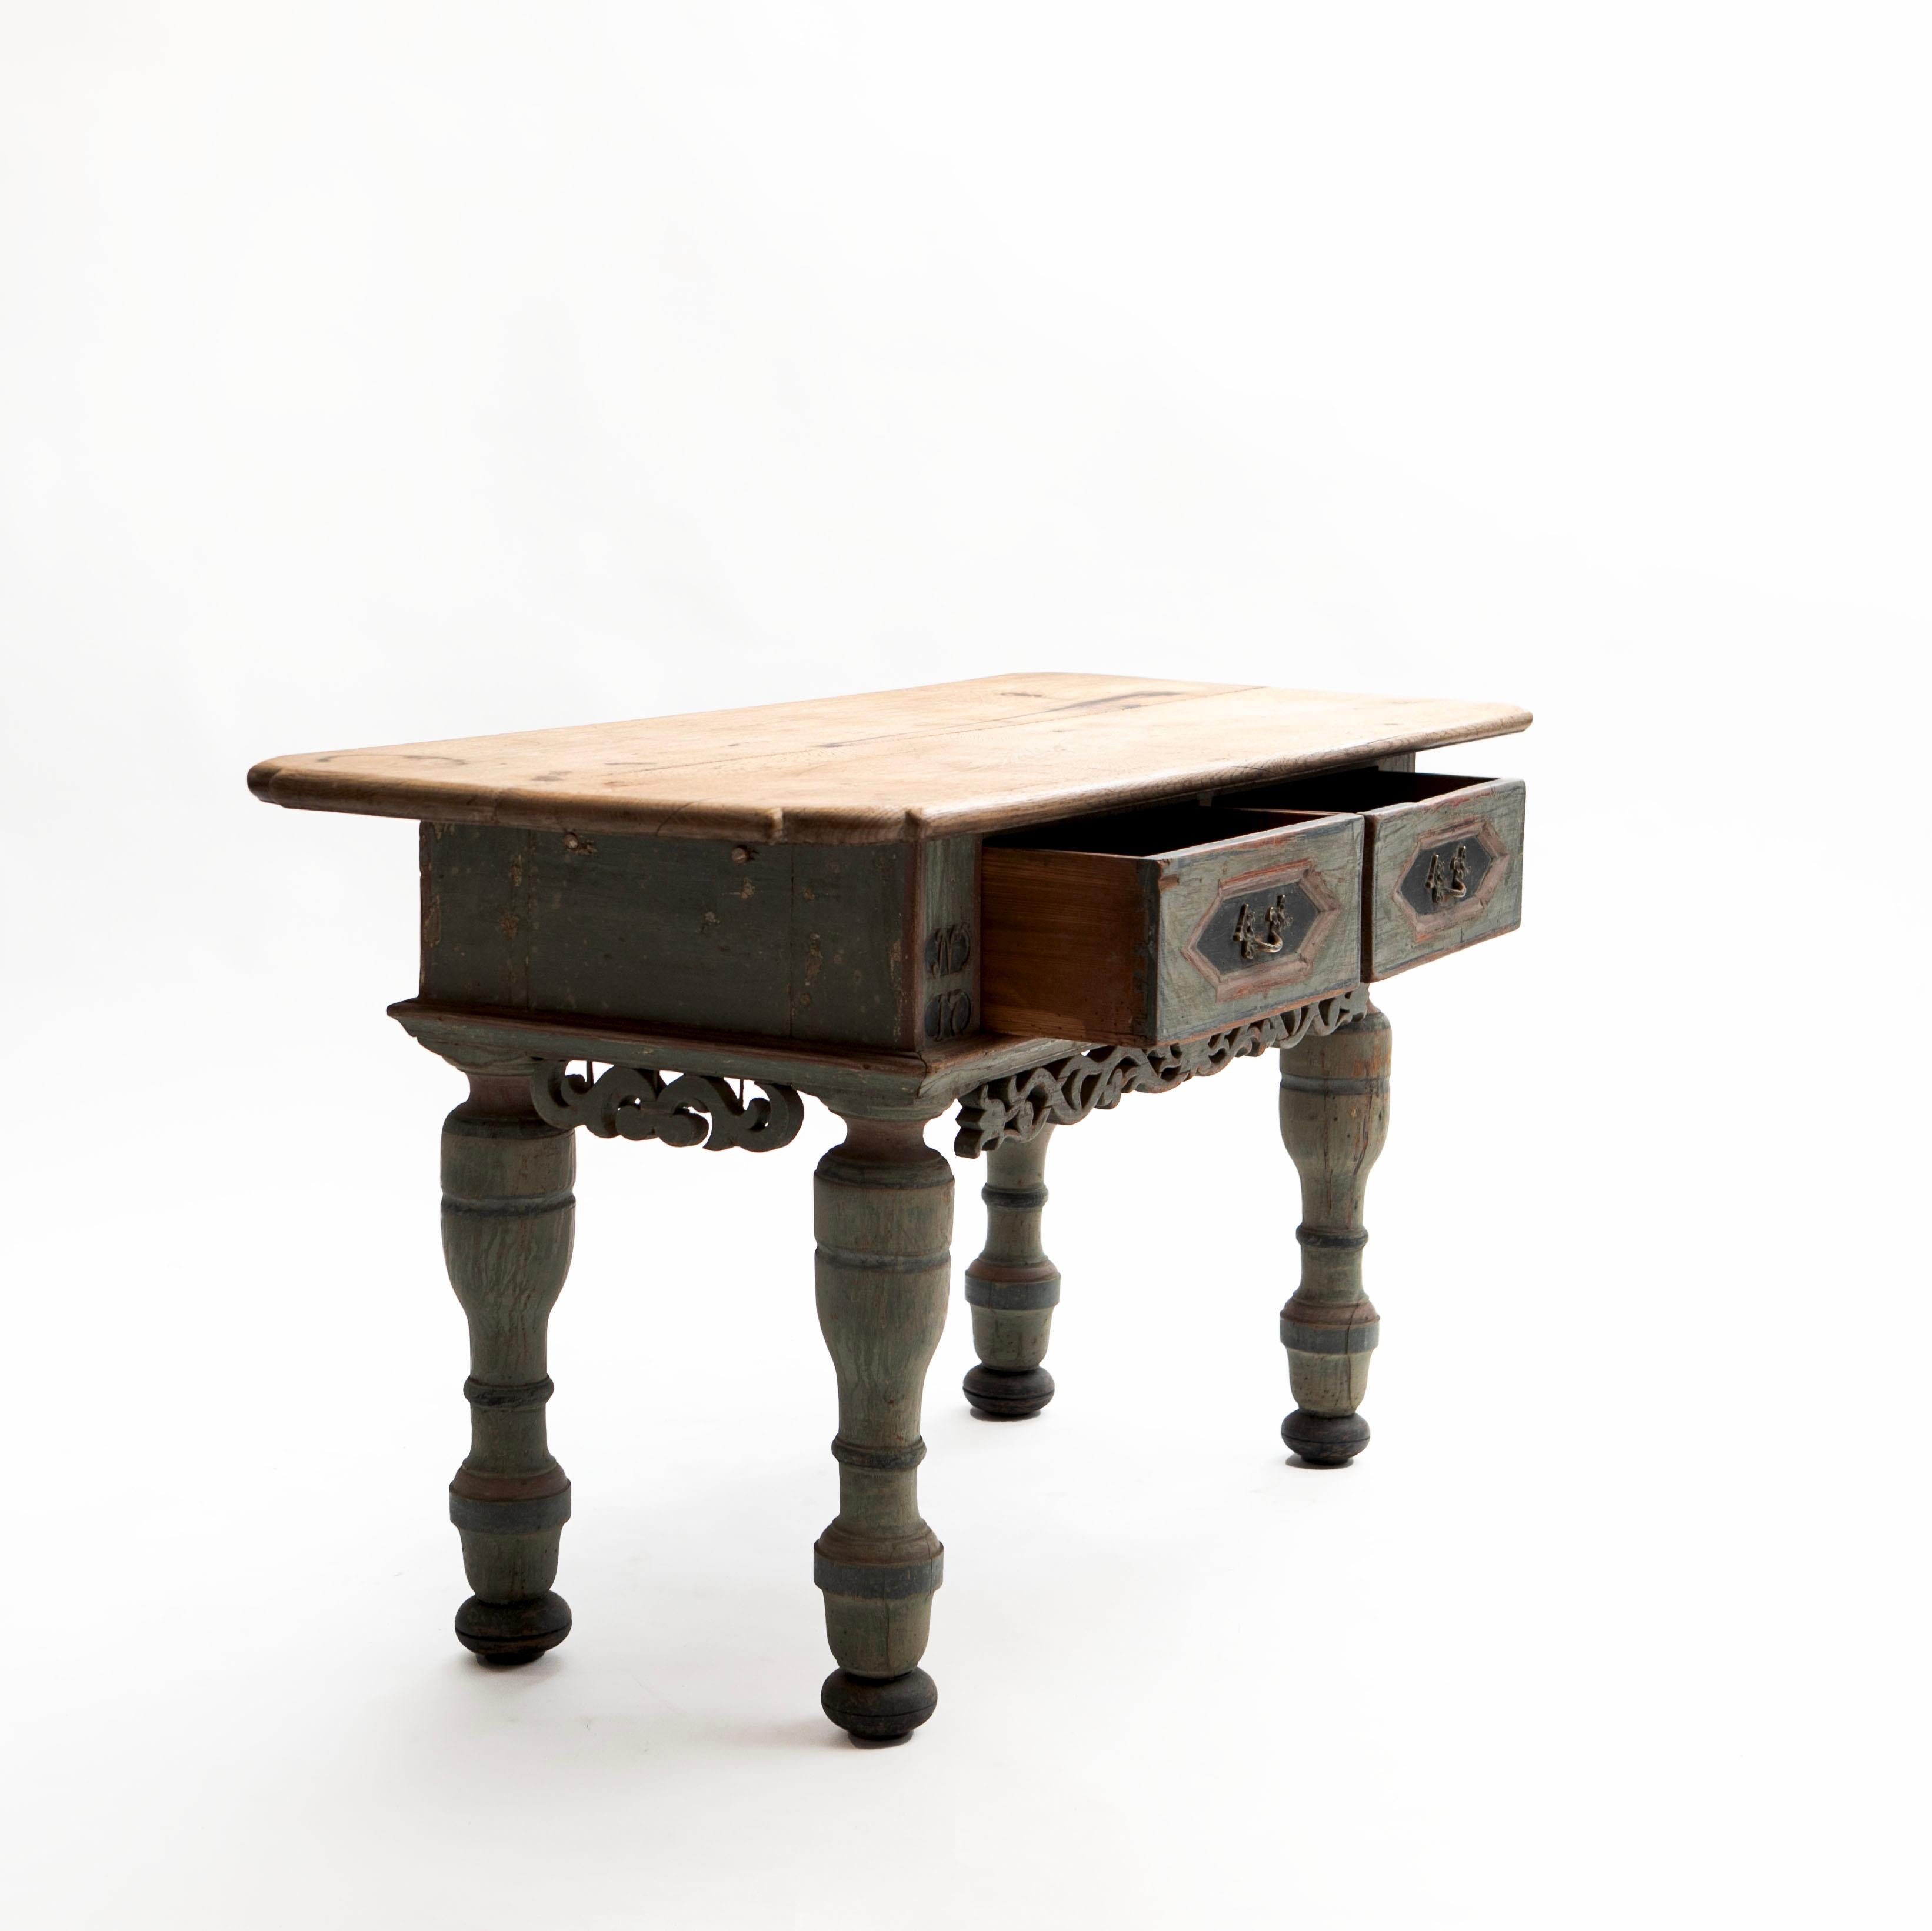 Hand-Painted Danish 18th Century Baroque Table With Two Drawers and Original Paint For Sale